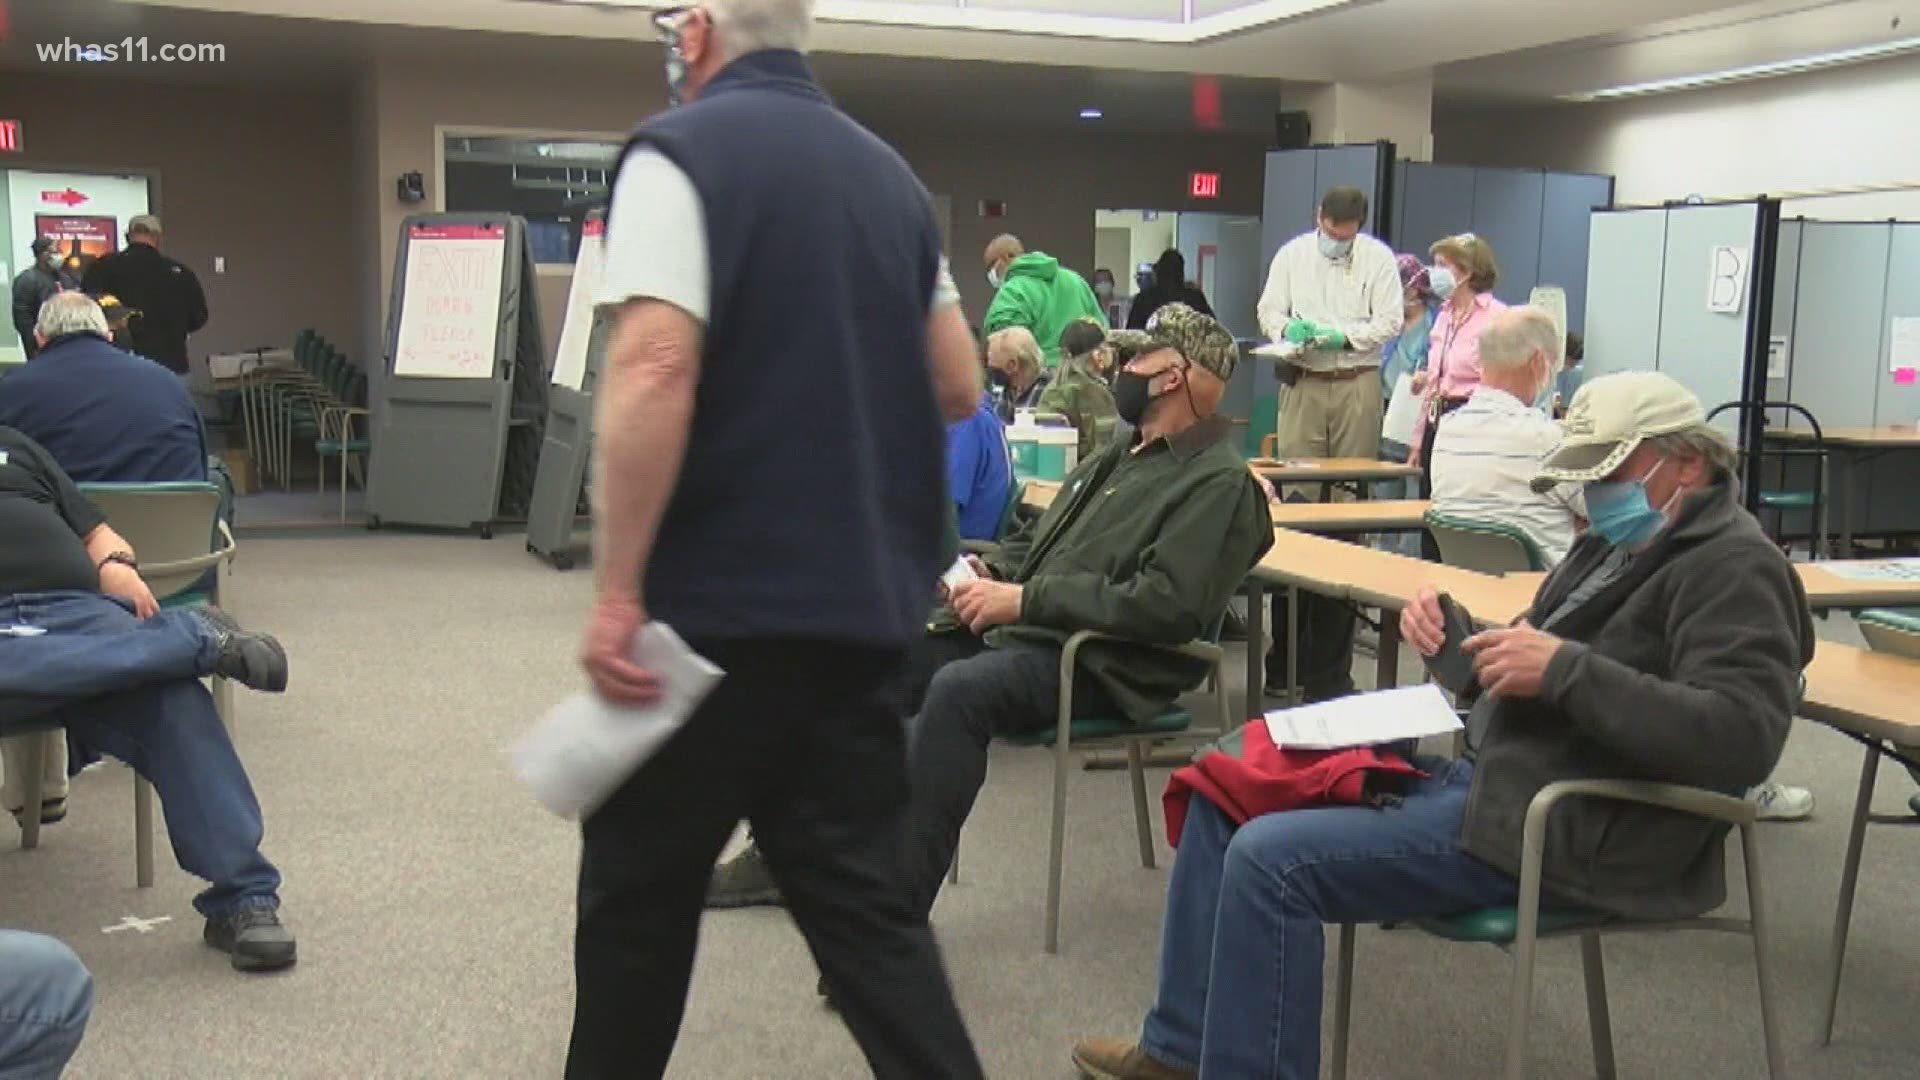 The Lexington VA hosted a clinic where 4,000 veterans were able to be vaccinated for COVID-19.